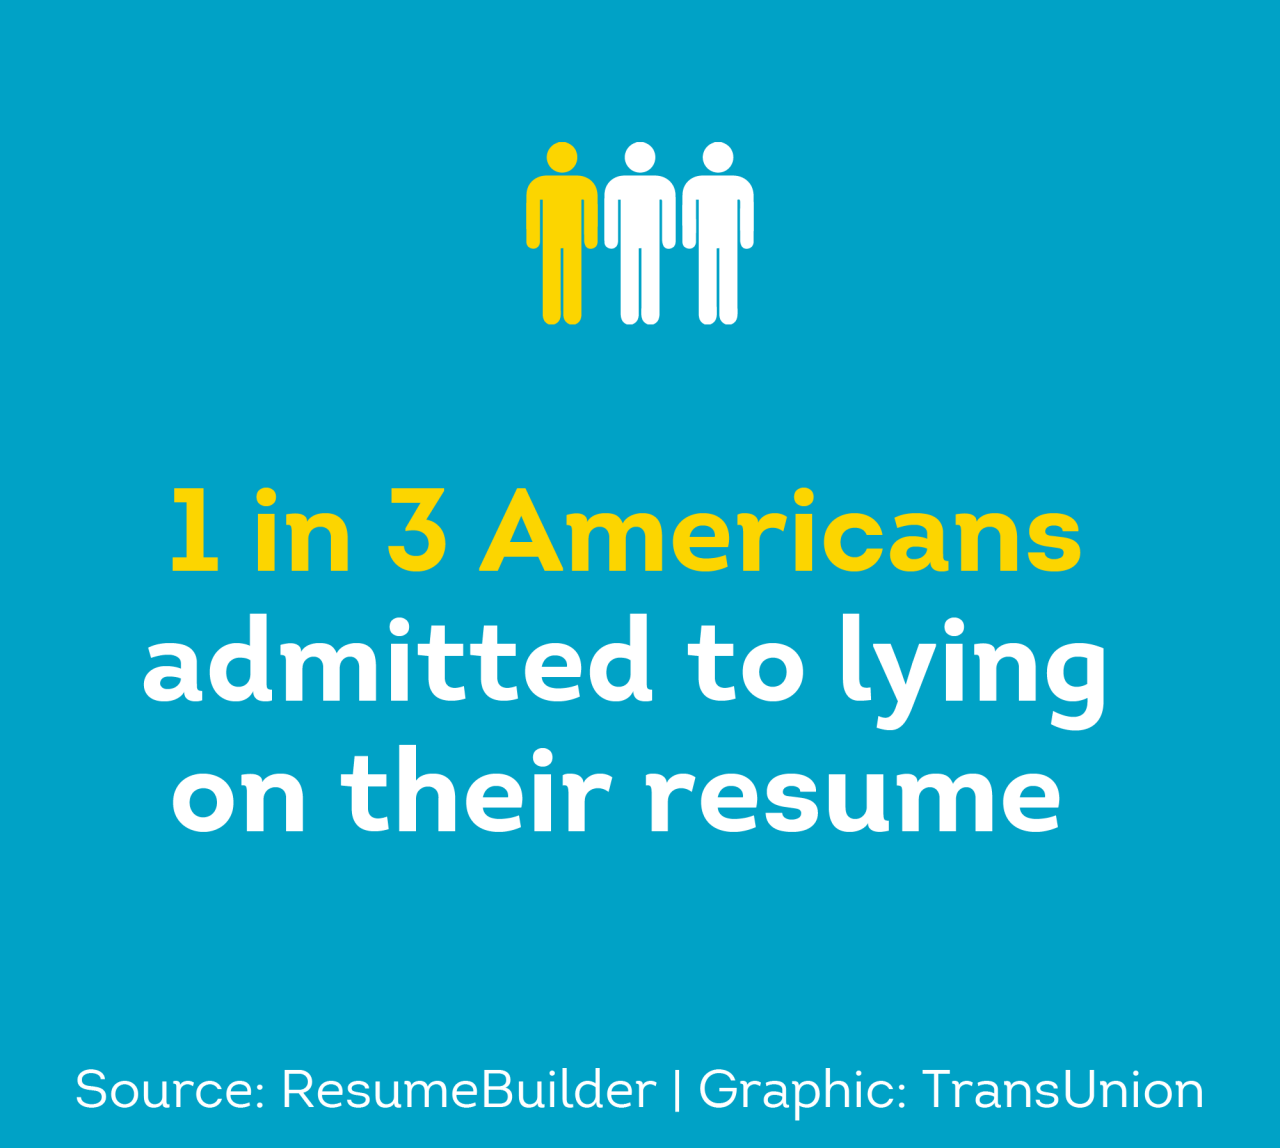 1 in 3 Americans admitted to lying on their resume